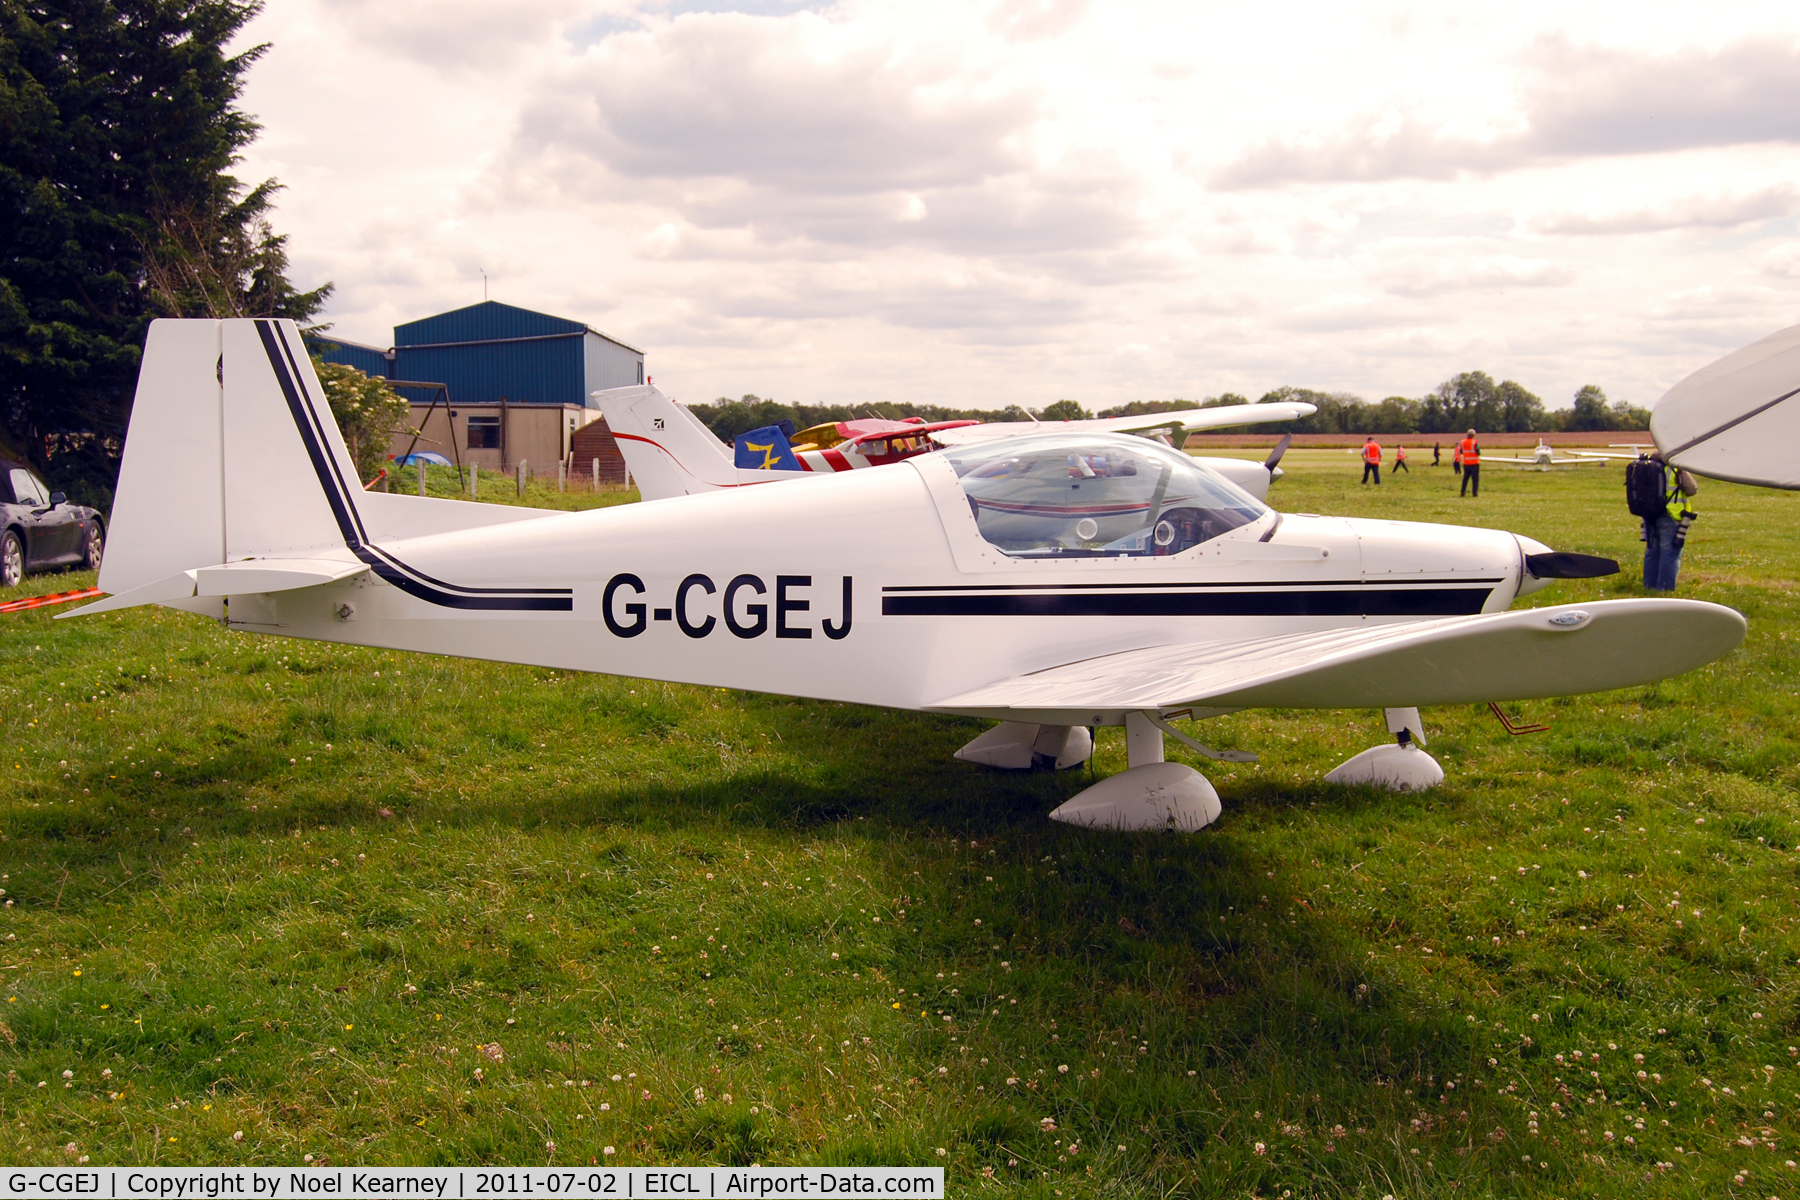 G-CGEJ, 2009 Alpi Aviation Pioneer 200-M C/N LAA 334-14909, Attending the Fly-in at Clonbullogue.